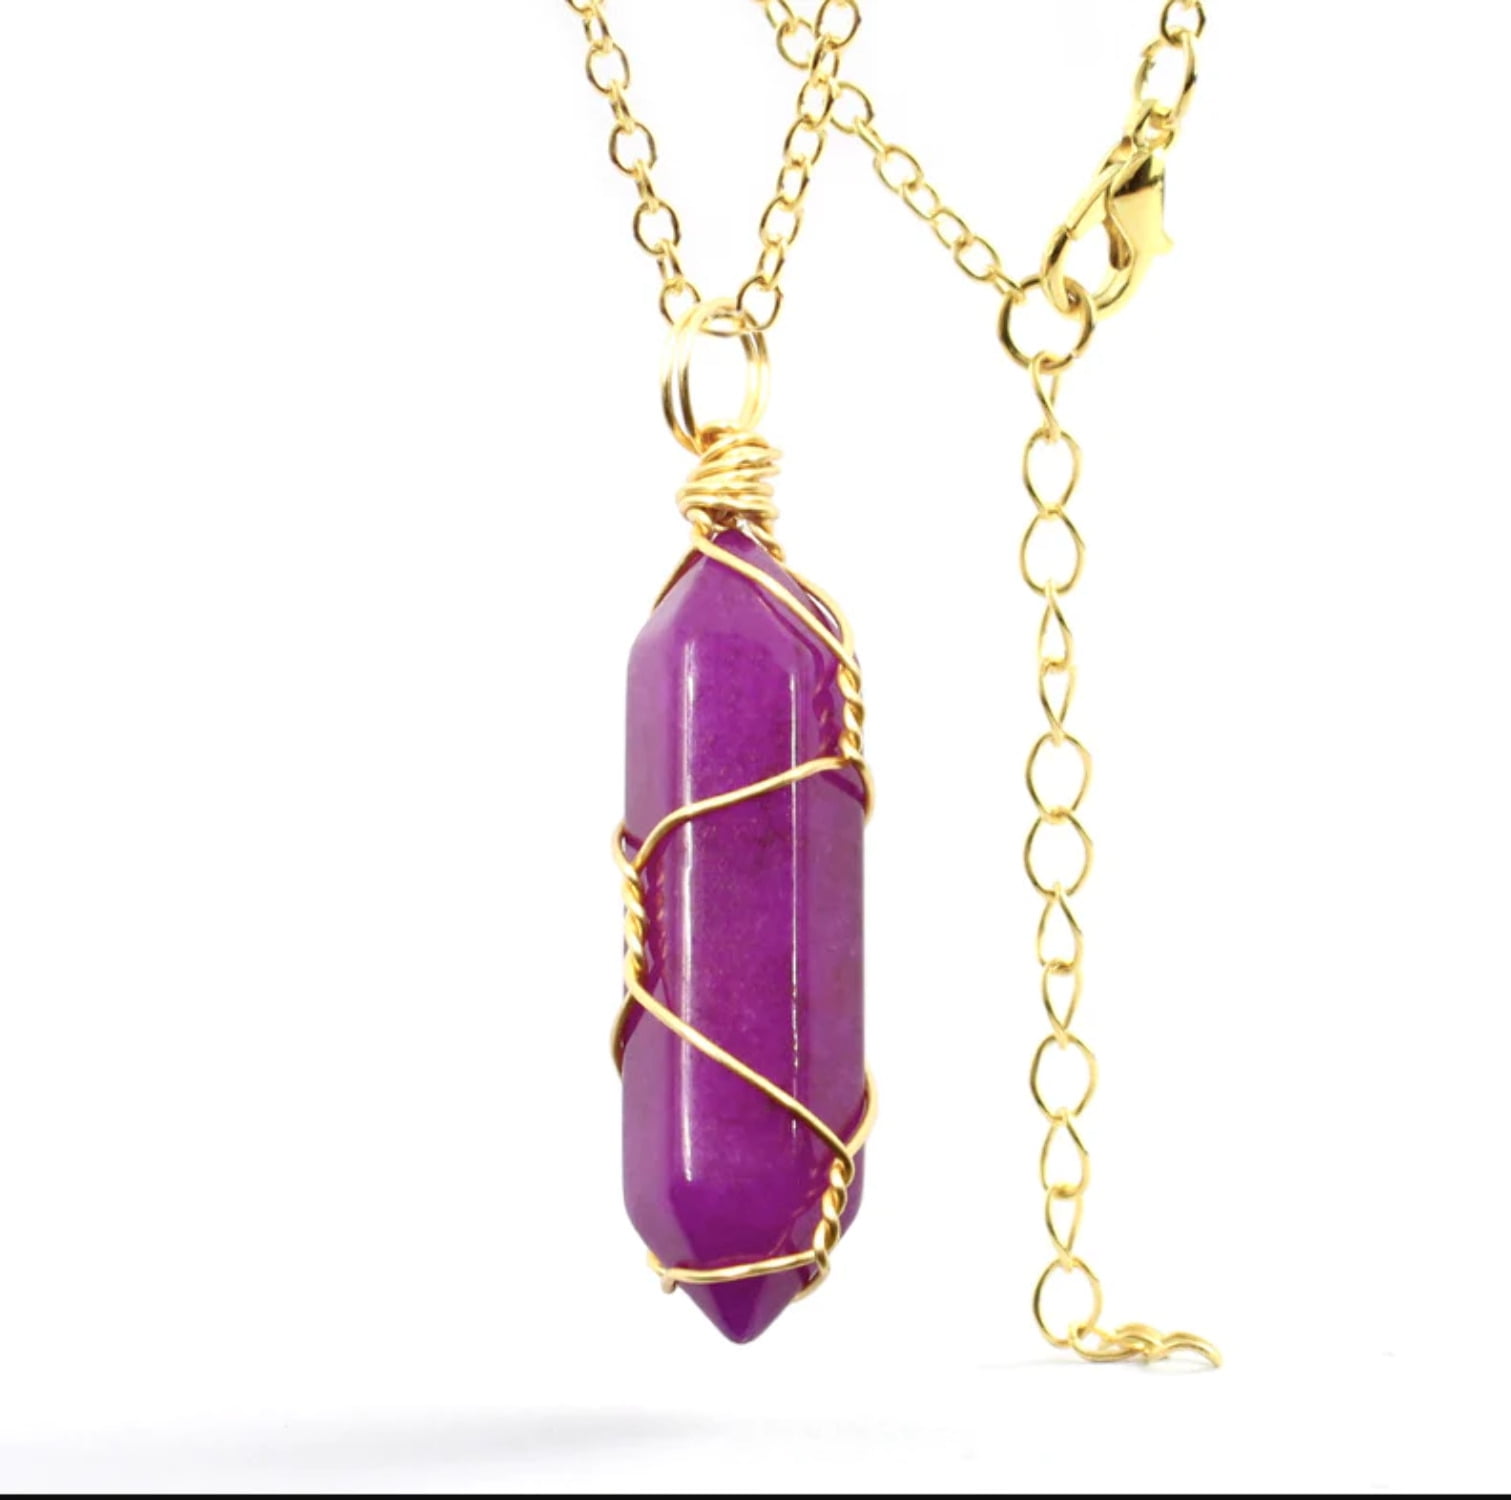 Natural Amethyst Crystal Gemstone Oval Cutting Shape Pendant/Locket with  Metal Chain for Reiki Healing and Crystal Healing Pendant (Size : 25 mm)